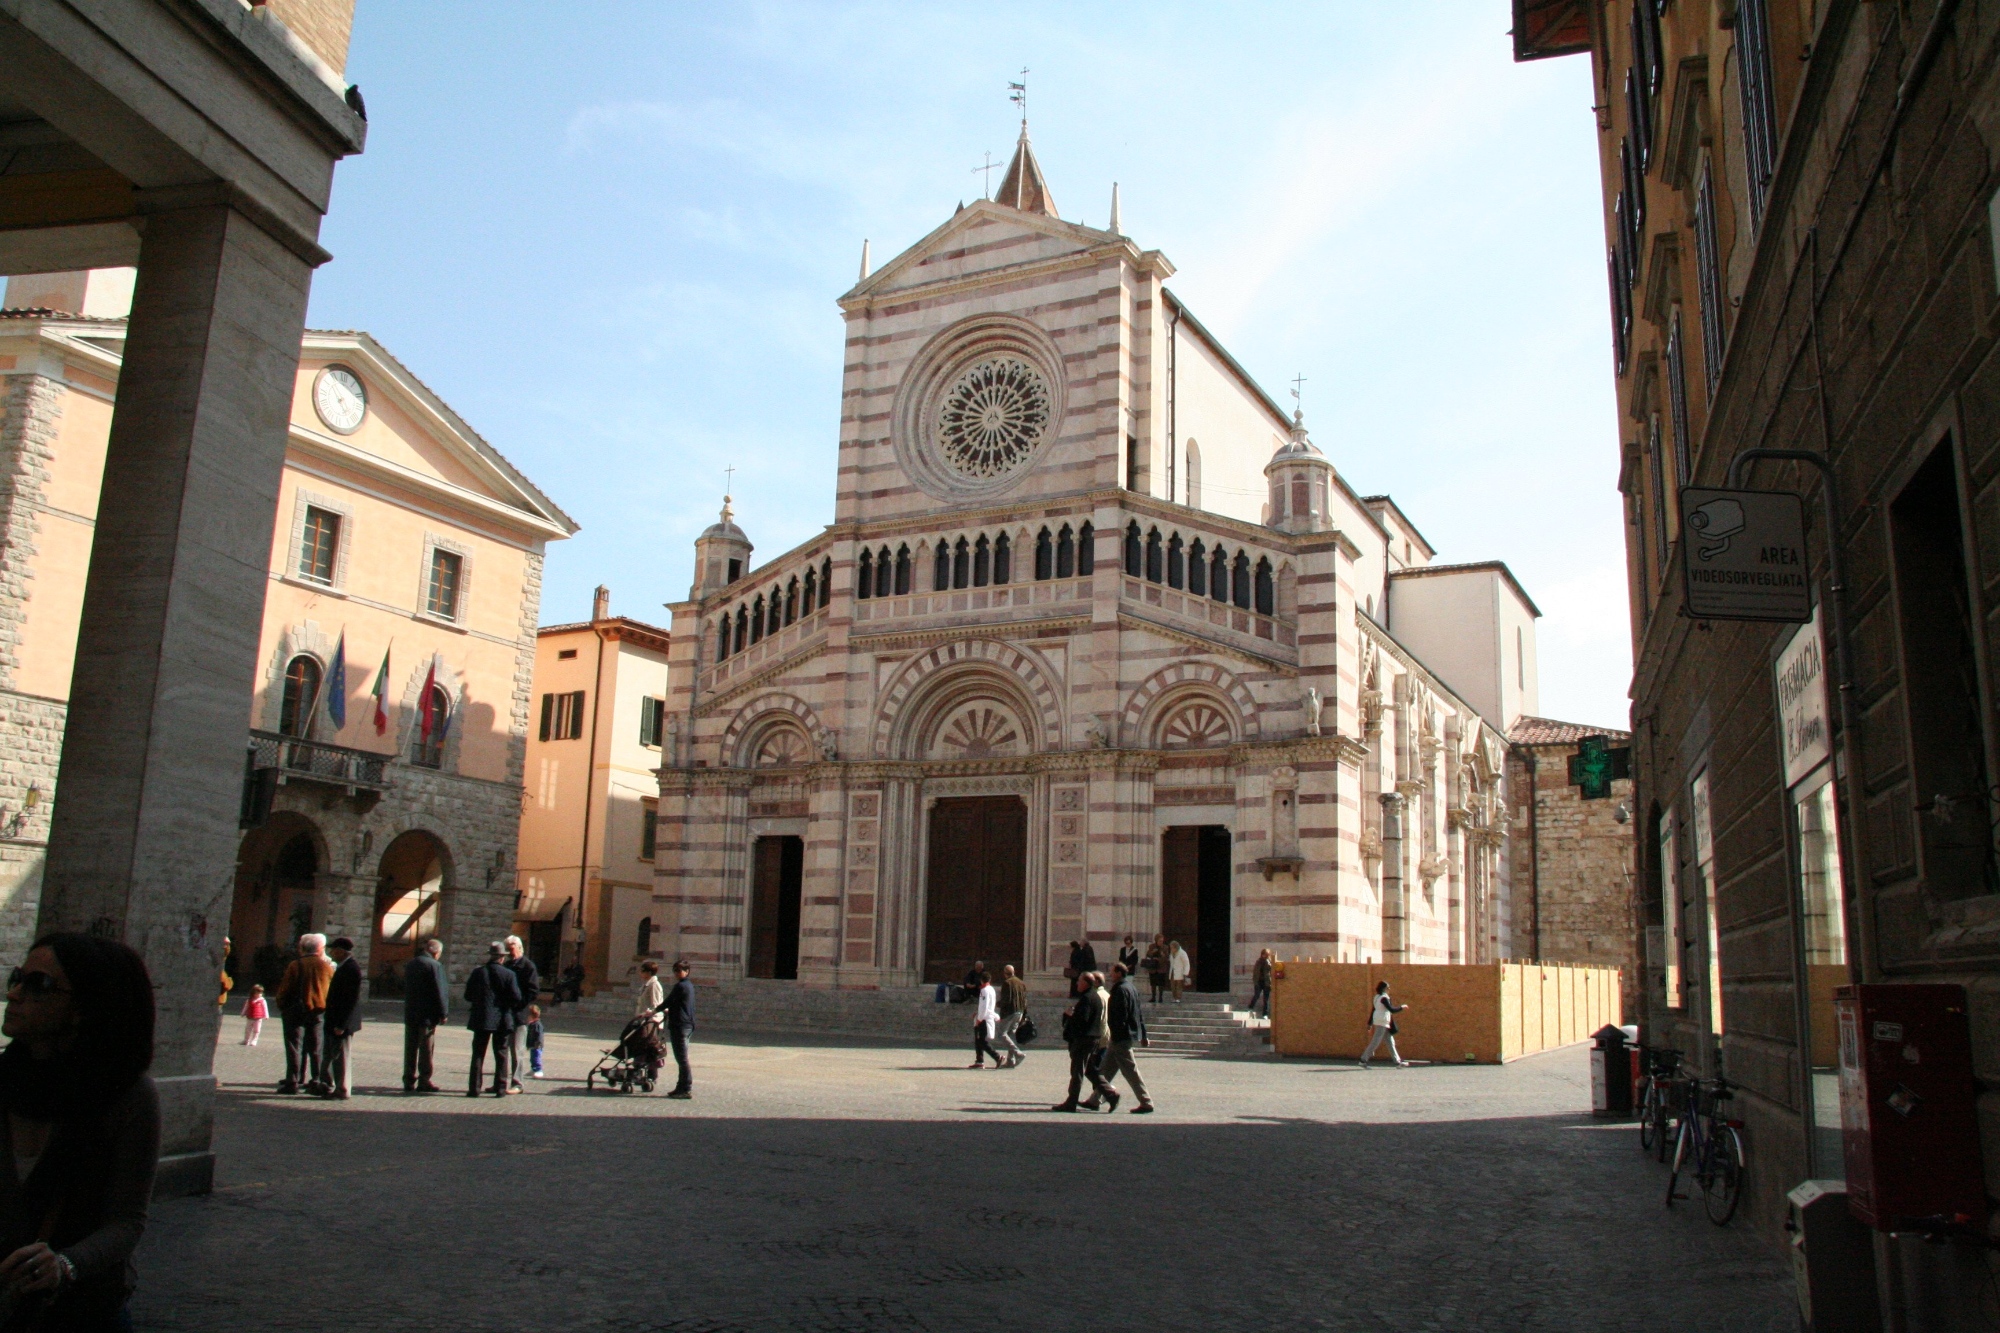 The Cathedral of San Lorenzo